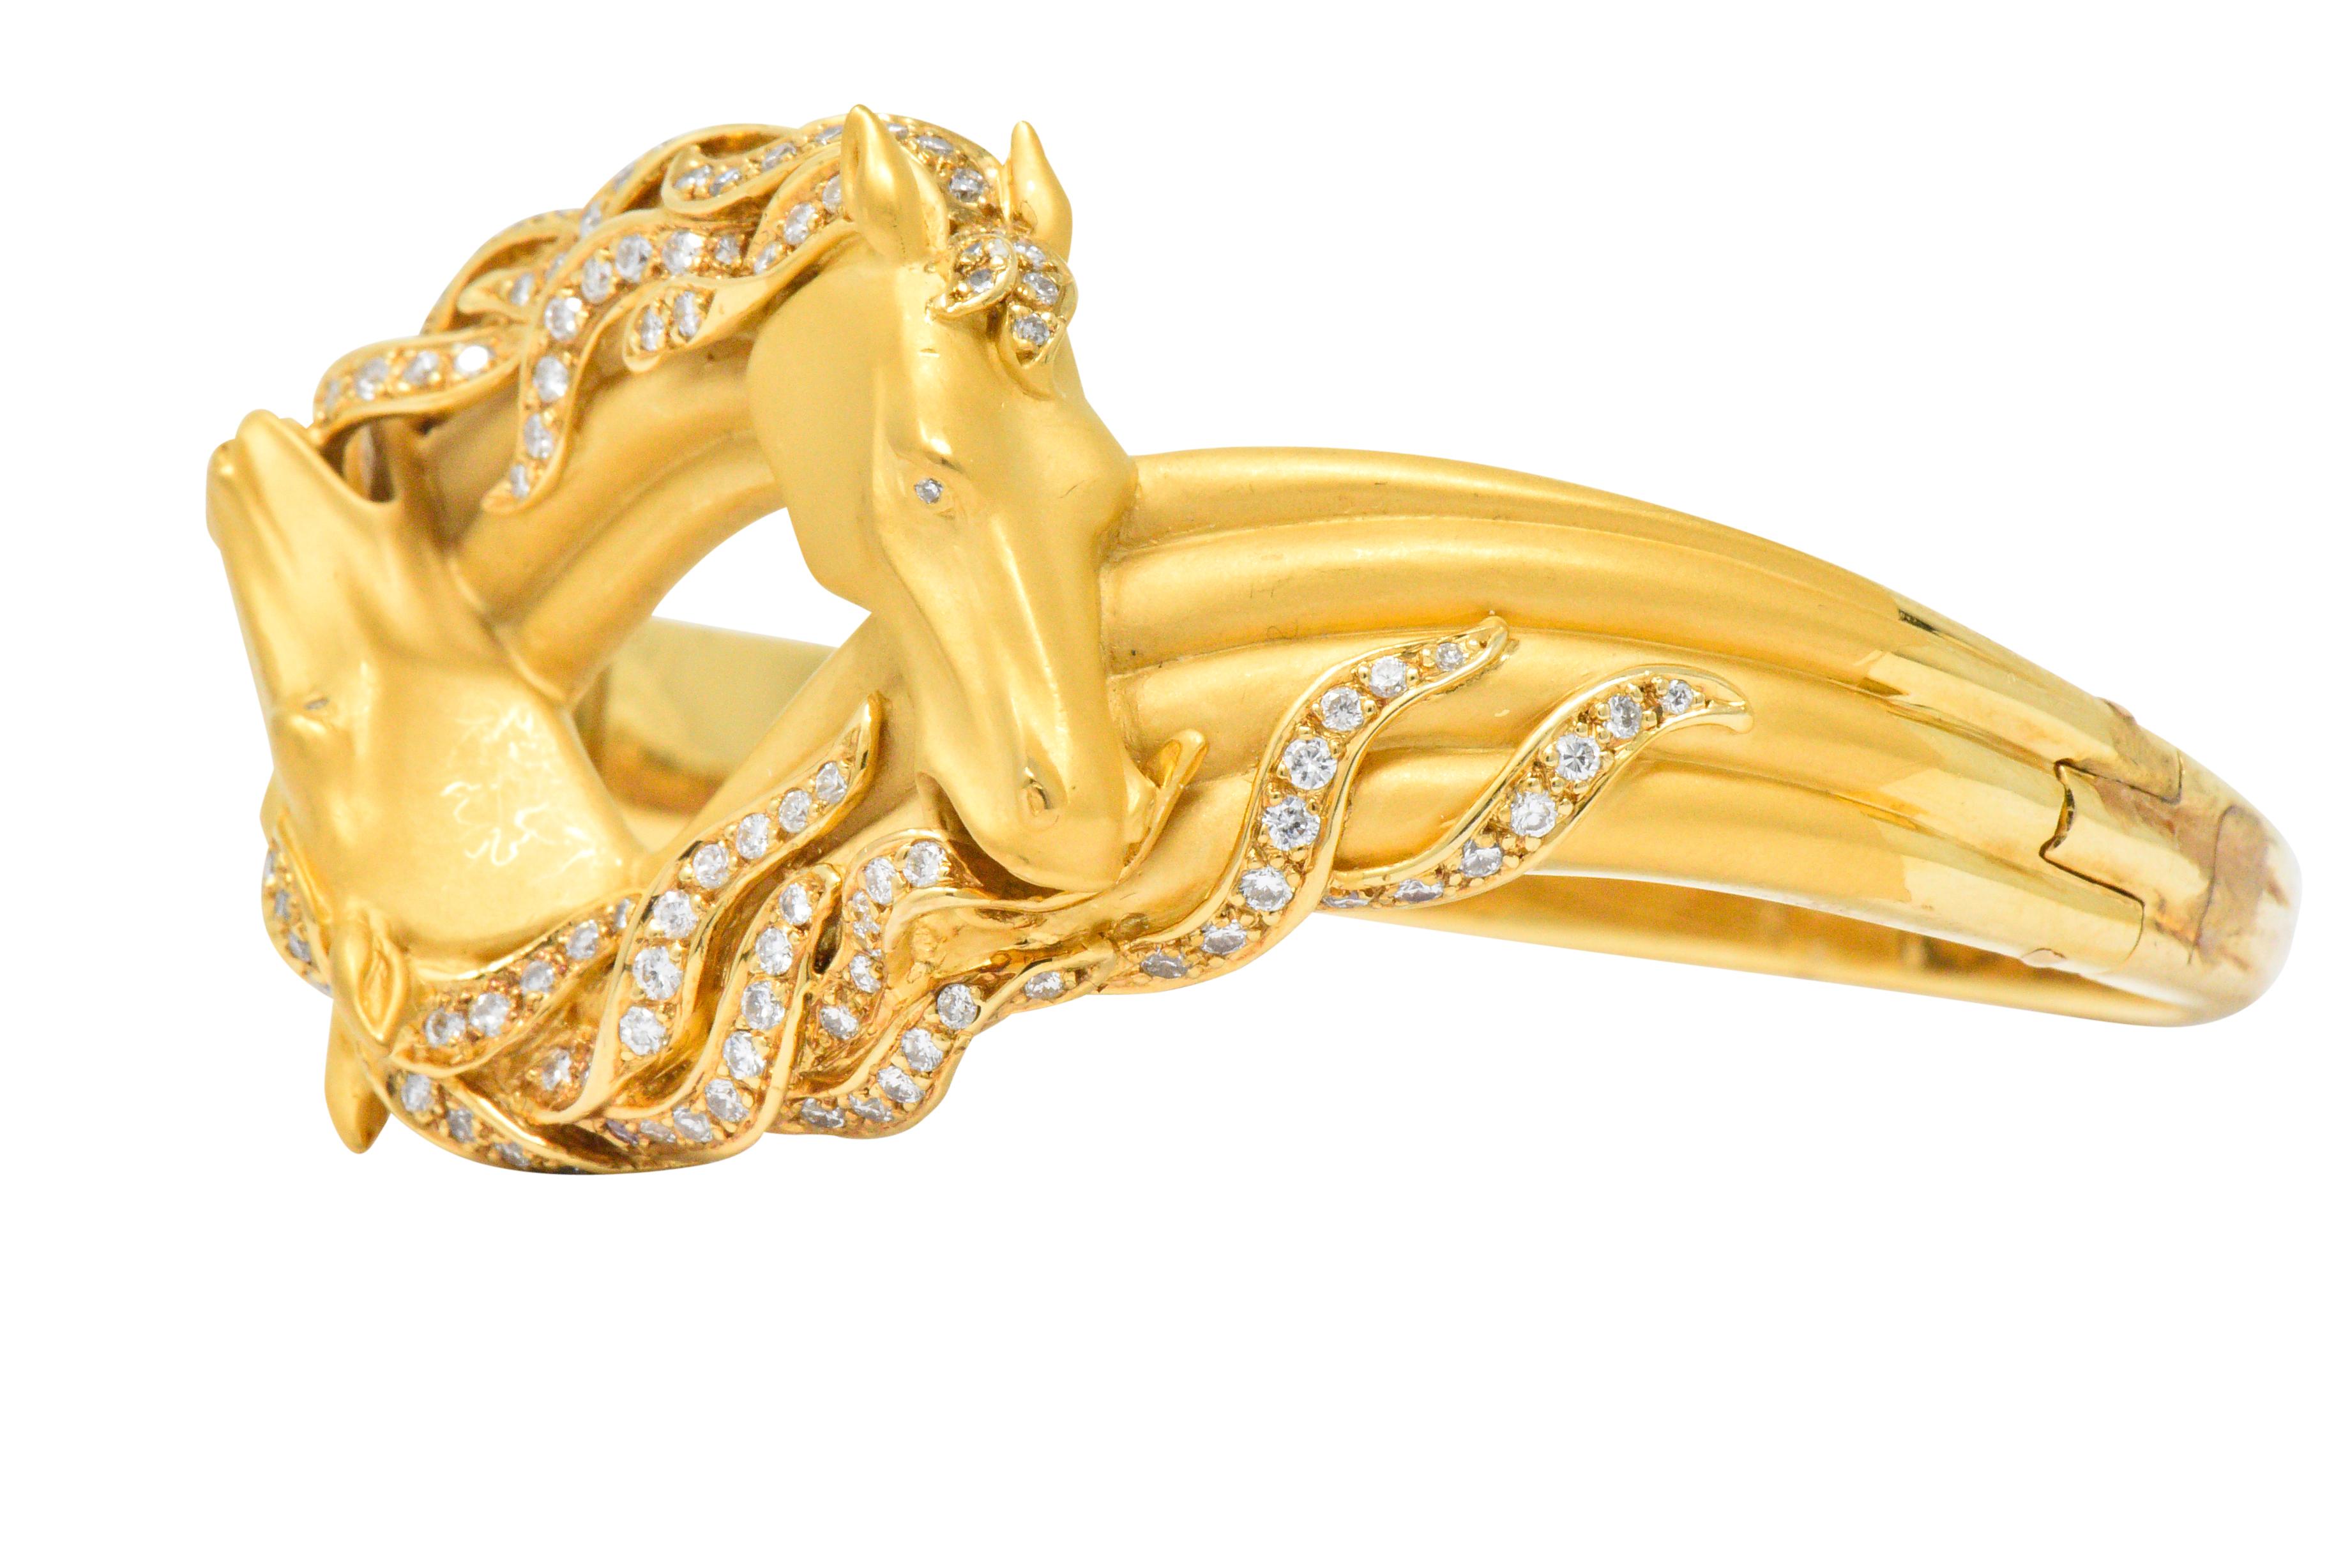 Featuring matte gold horse heads with diamond set eyes in a by-pass look presentation

Flowing manes set with round brilliant cut diamonds weighing approximately 1.45 carats total, G/H color and VS clarity 

Part of the Ecuestre collection

Hinged